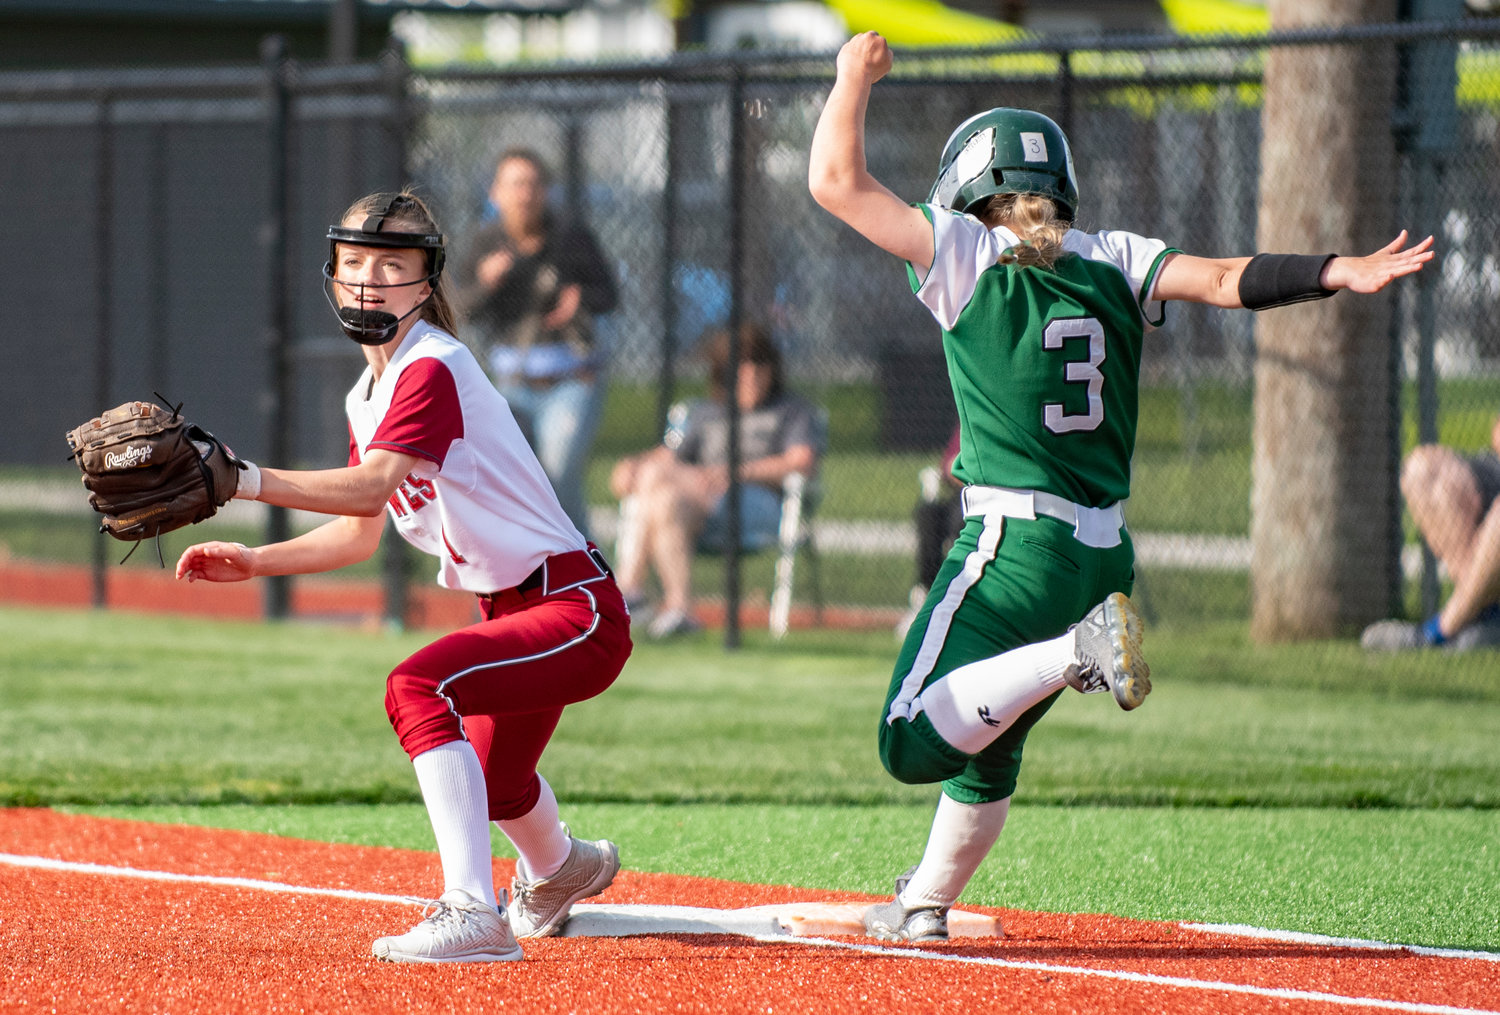 W.F. West second baseman Brielle Etter catches the out at first base.